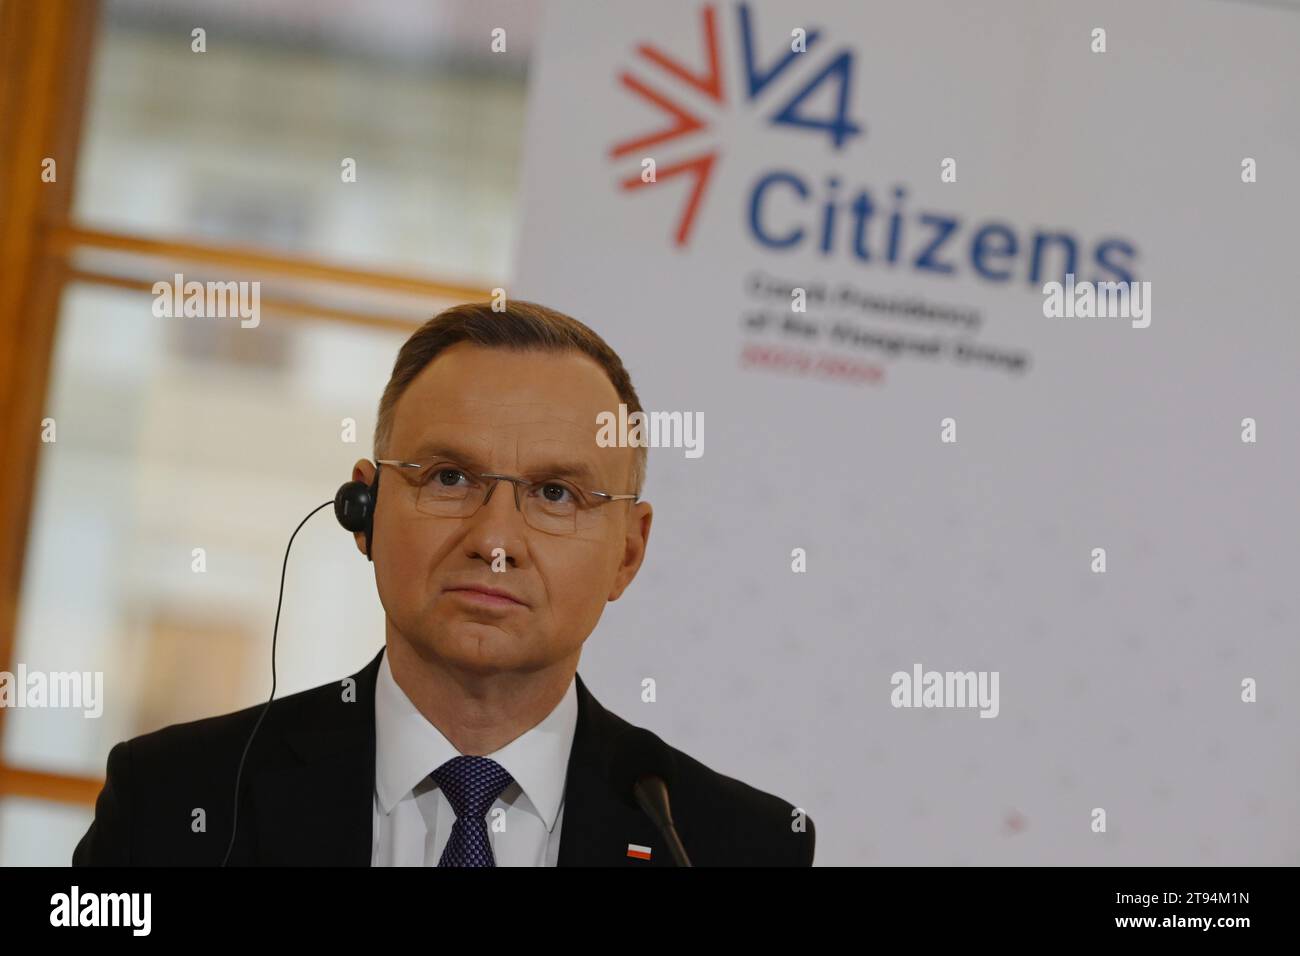 Polish president Andrzej Duda seen during a joint press conference after the summit of presidents of the Visegrad Group (V4) at Prague castle. Presidents of the Czech Republic, Slovakia, Poland and Hungary meets at the summit of the Visegrad Group (V4) hosted by the current Czech presidency of the group. The main topics discussed during the summit are common infrastructure projects and strengthen of the contacts between member countries. Visegrad group (V4) was established in 1991 and consists of 4 countries from Central Europe: Czech republic, Slovakia, Hungary and Poland. Stock Photo